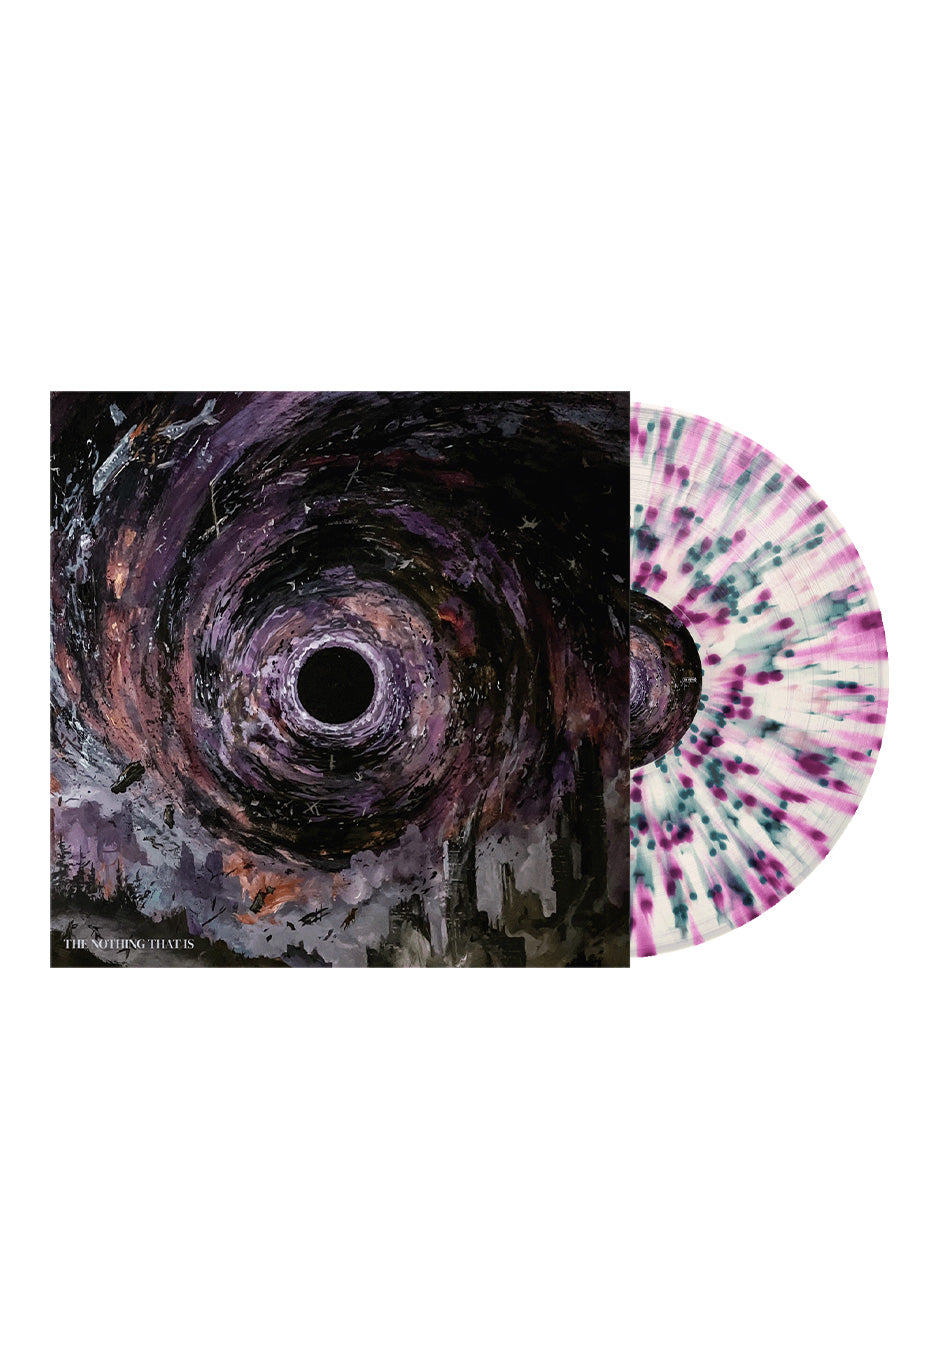 Fit For An Autopsy - The Nothing That Is Ltd. Bone/Blue/Pink/Purple - Splatter Vinyl | Neutral-Image